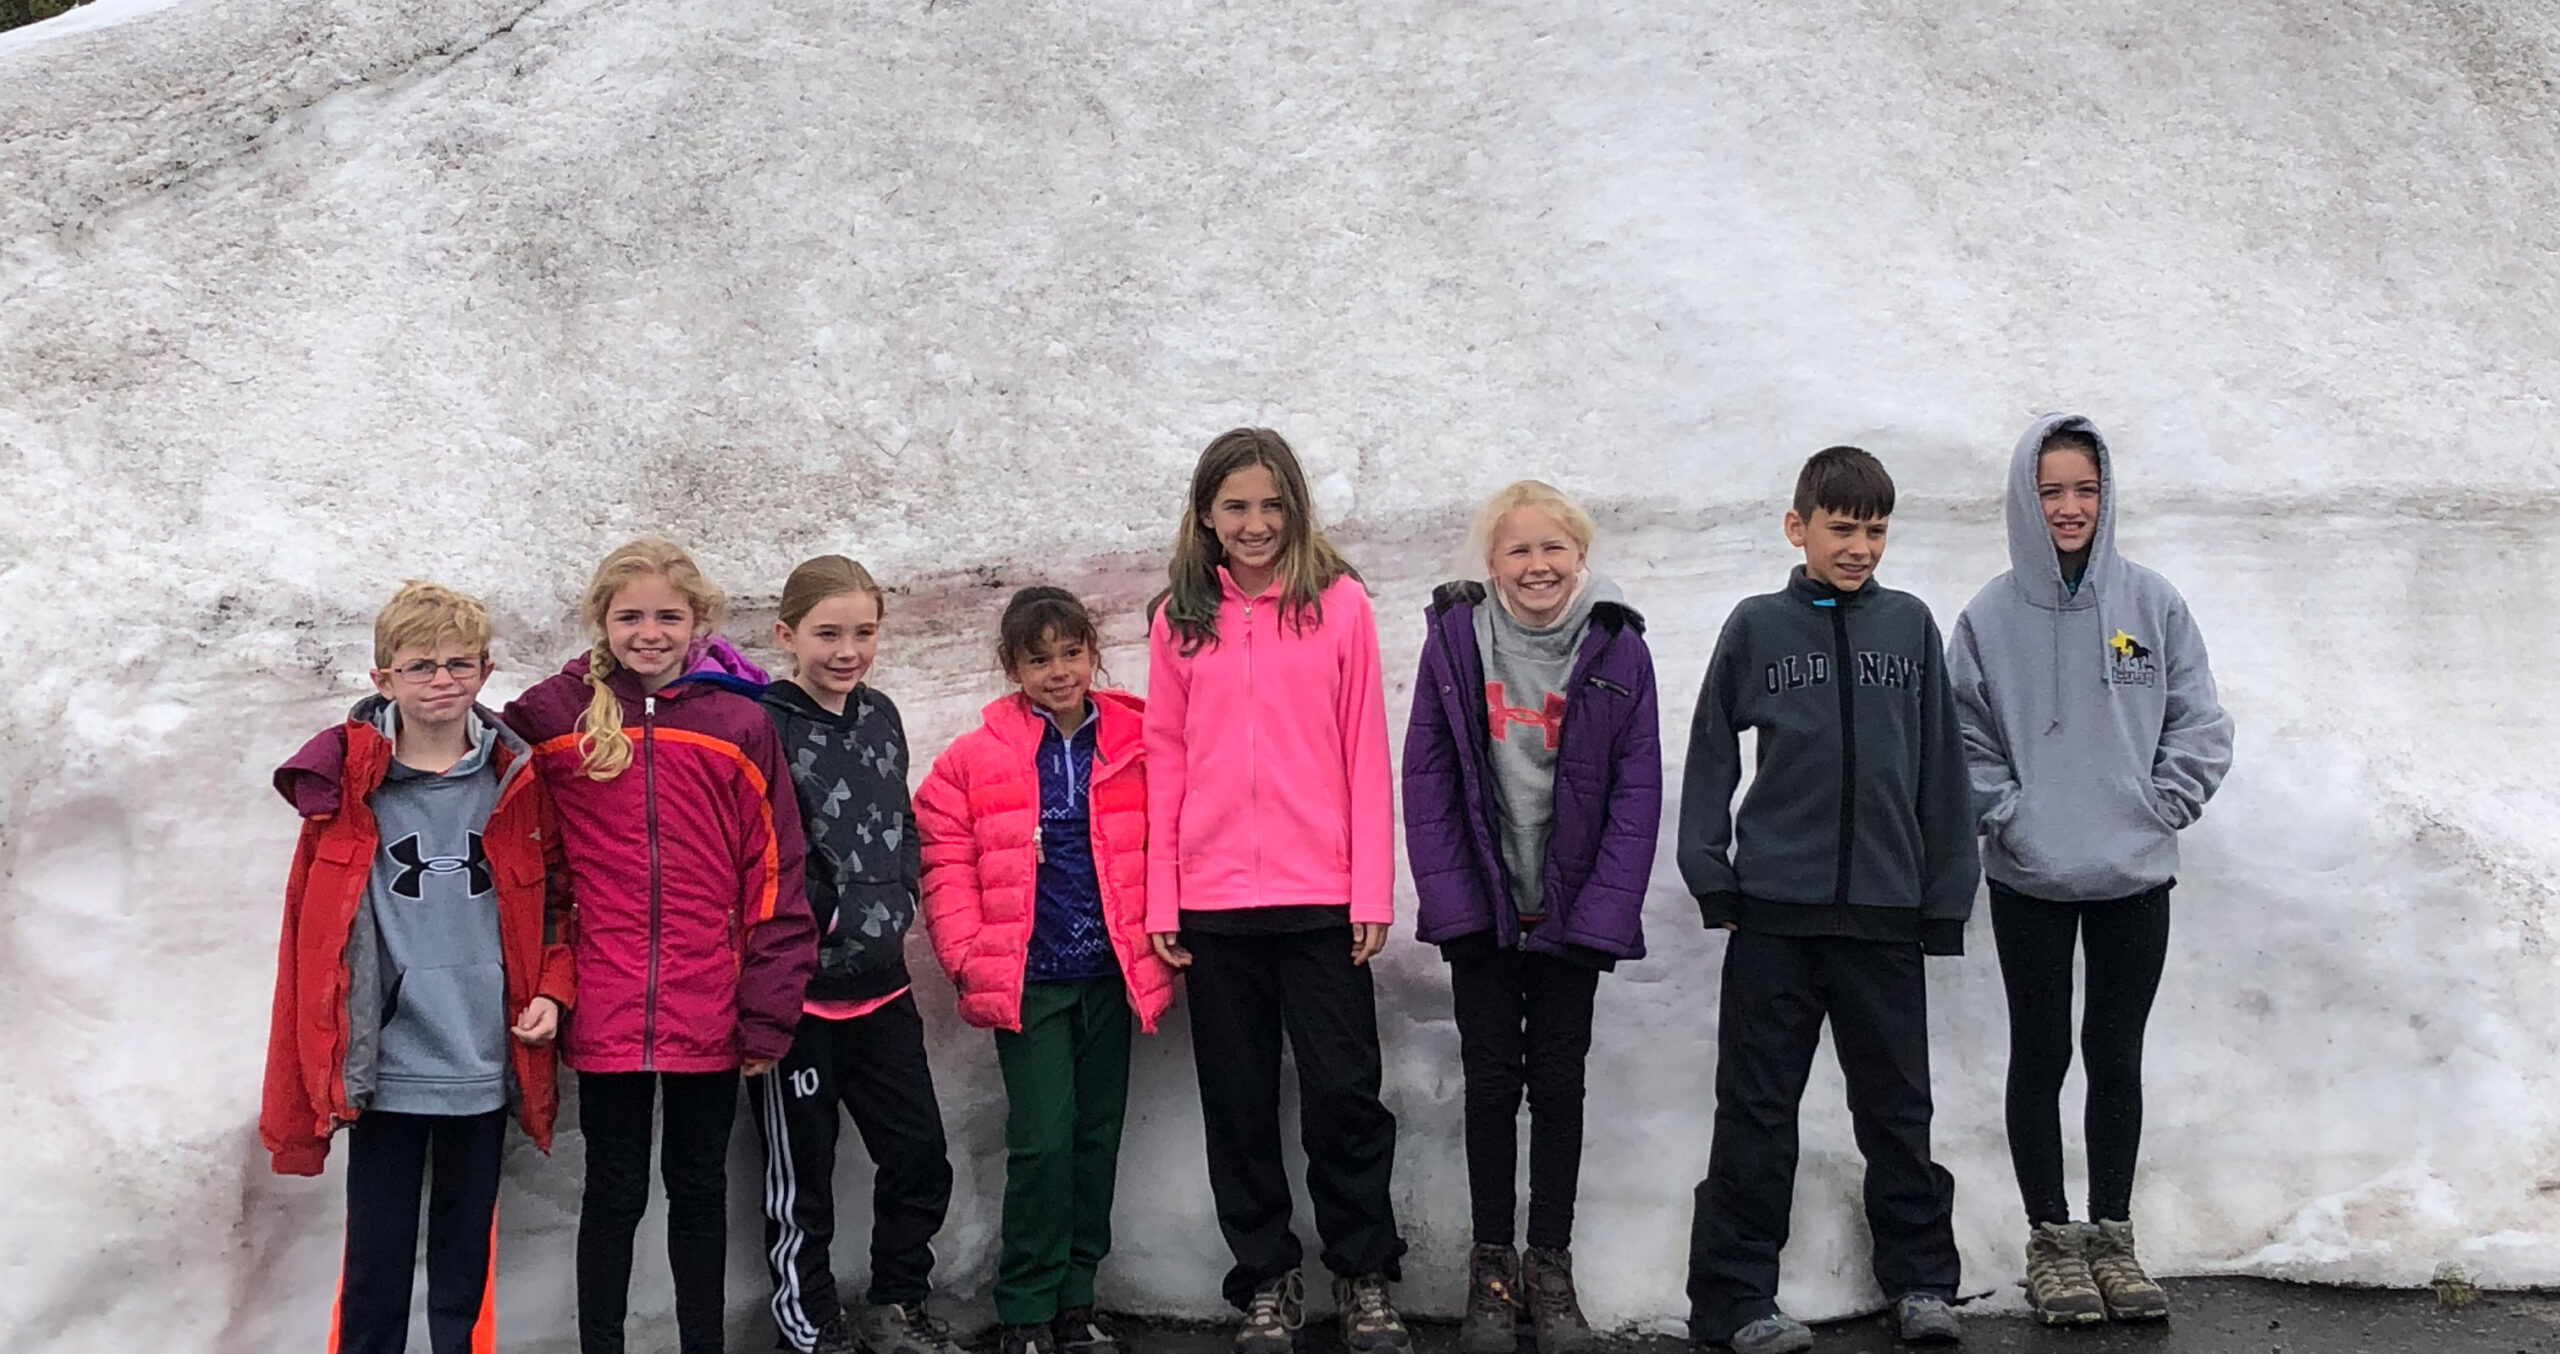 youth educational adventures group posing in front of a wall of snow